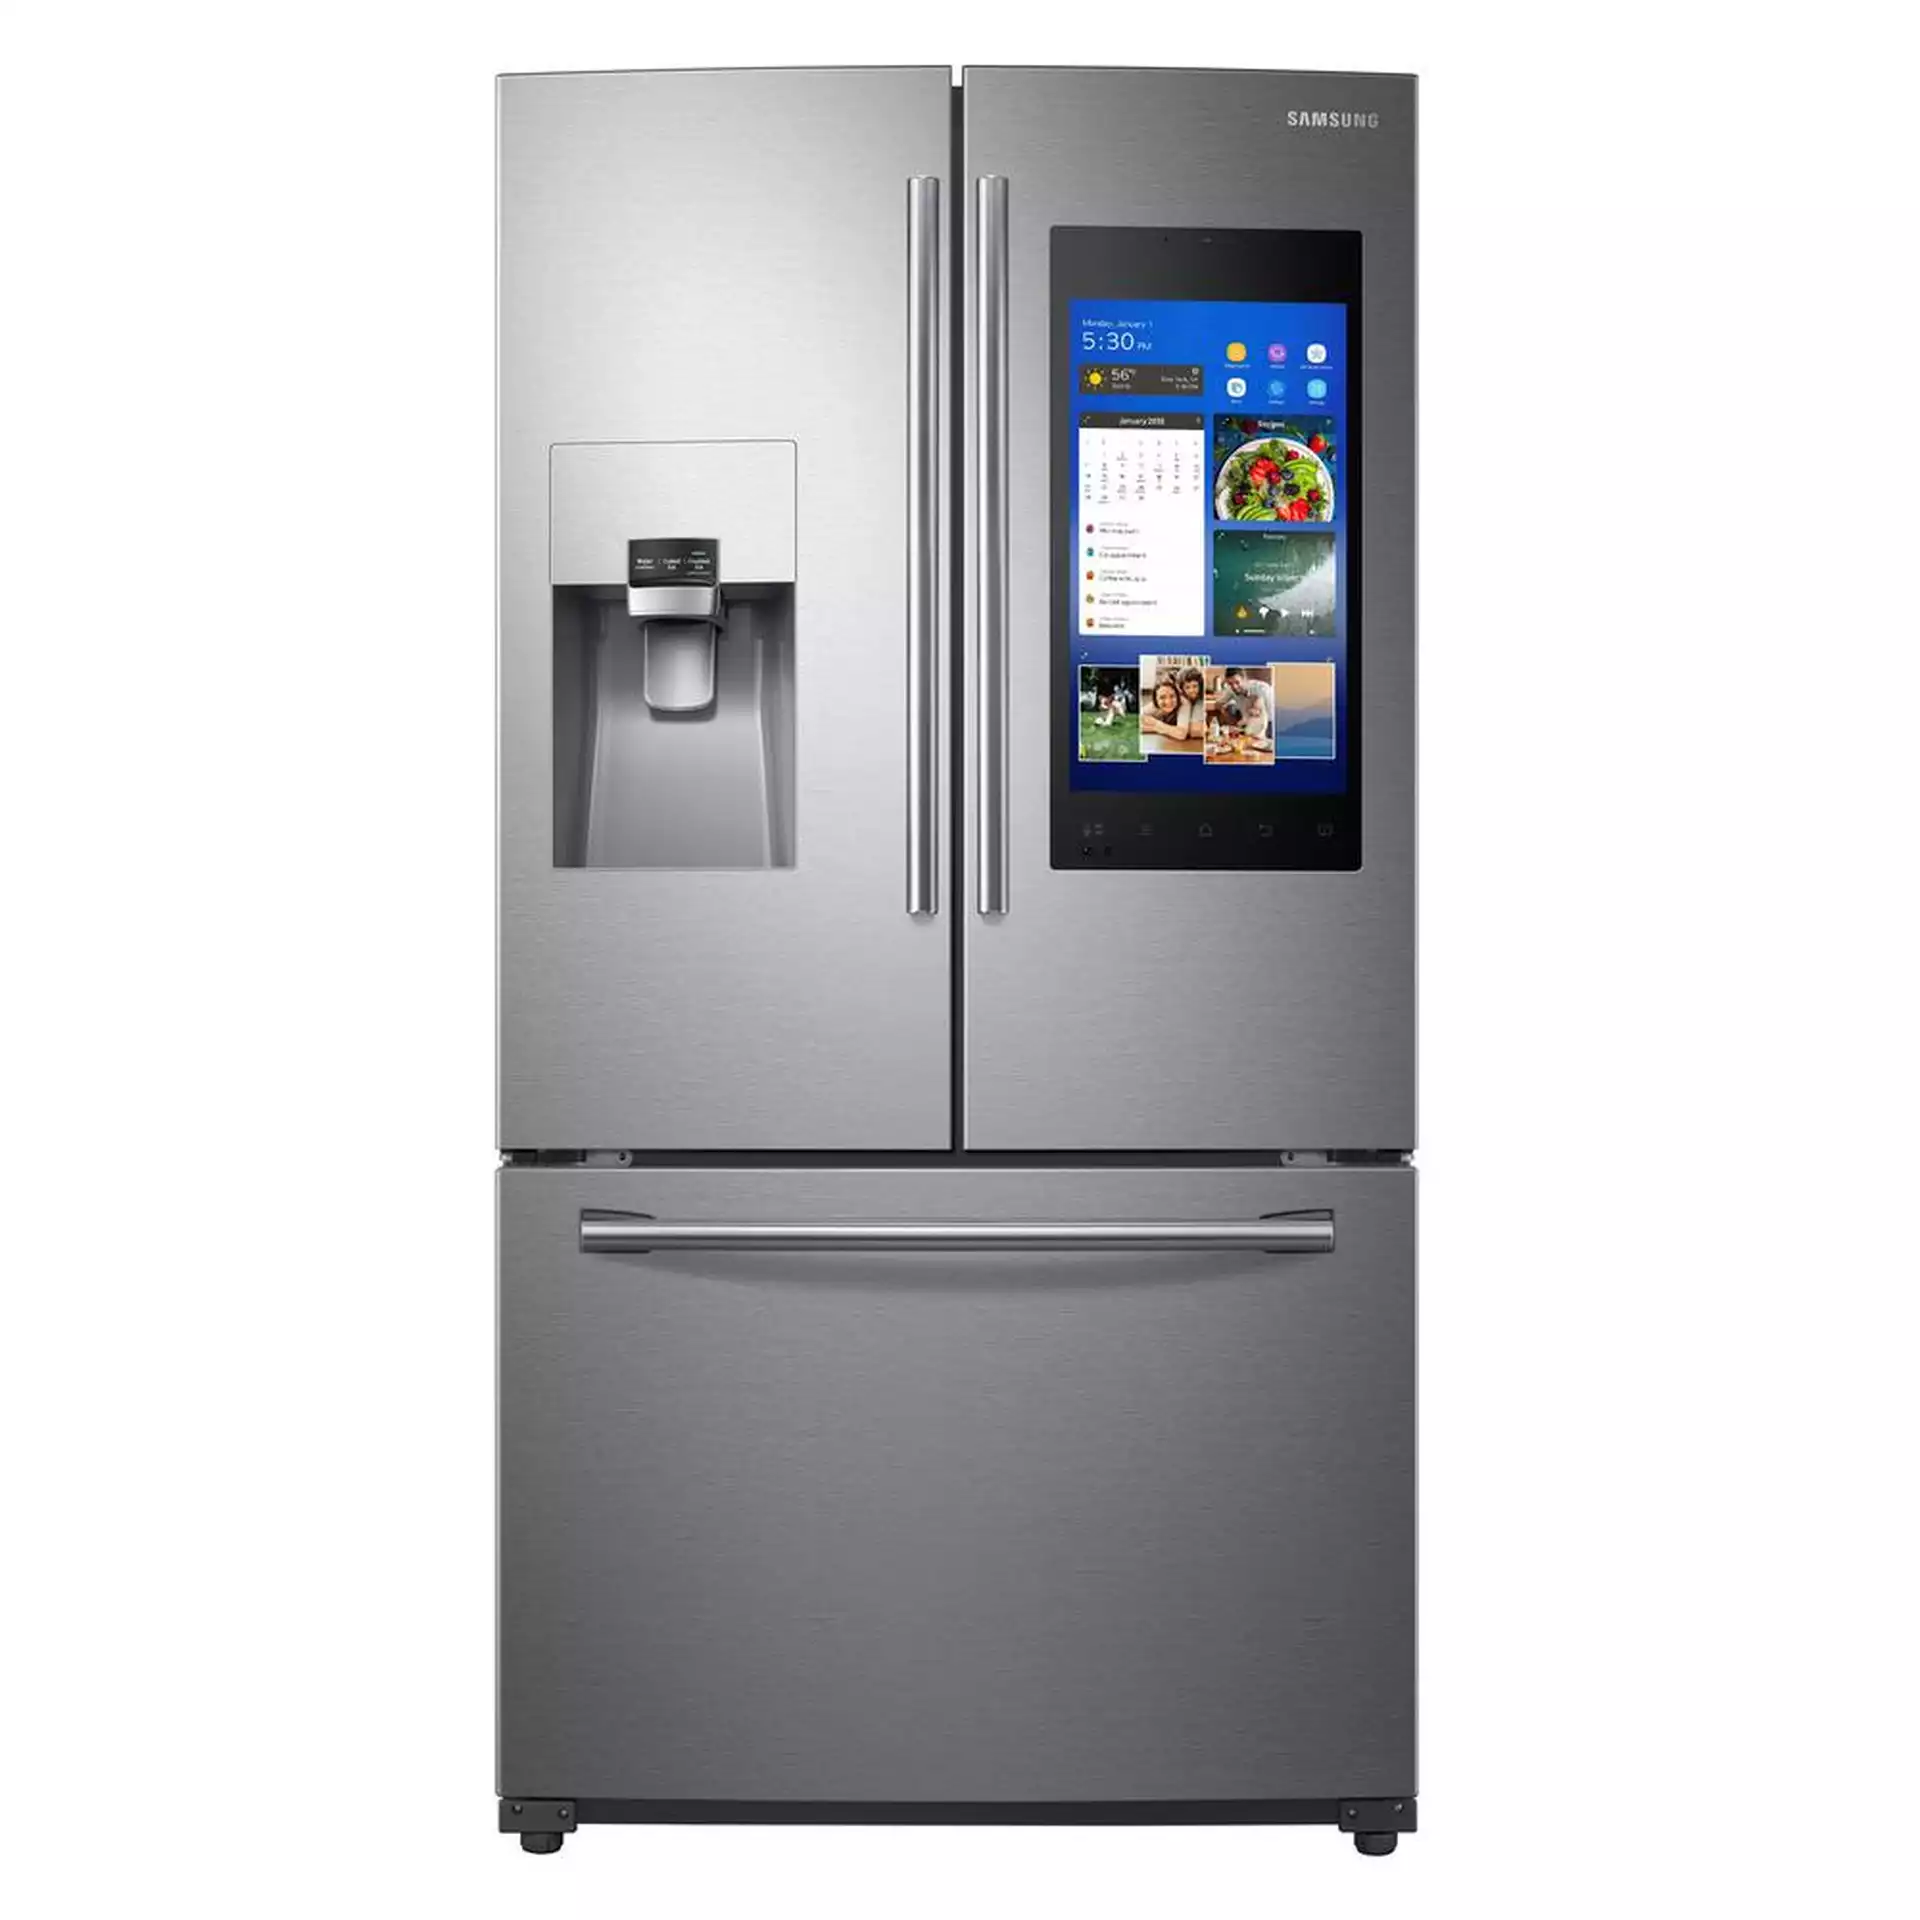 Samsung 24.2 cu. ft. Family Hub French Door Smart Refrigerator in Stainless Steel